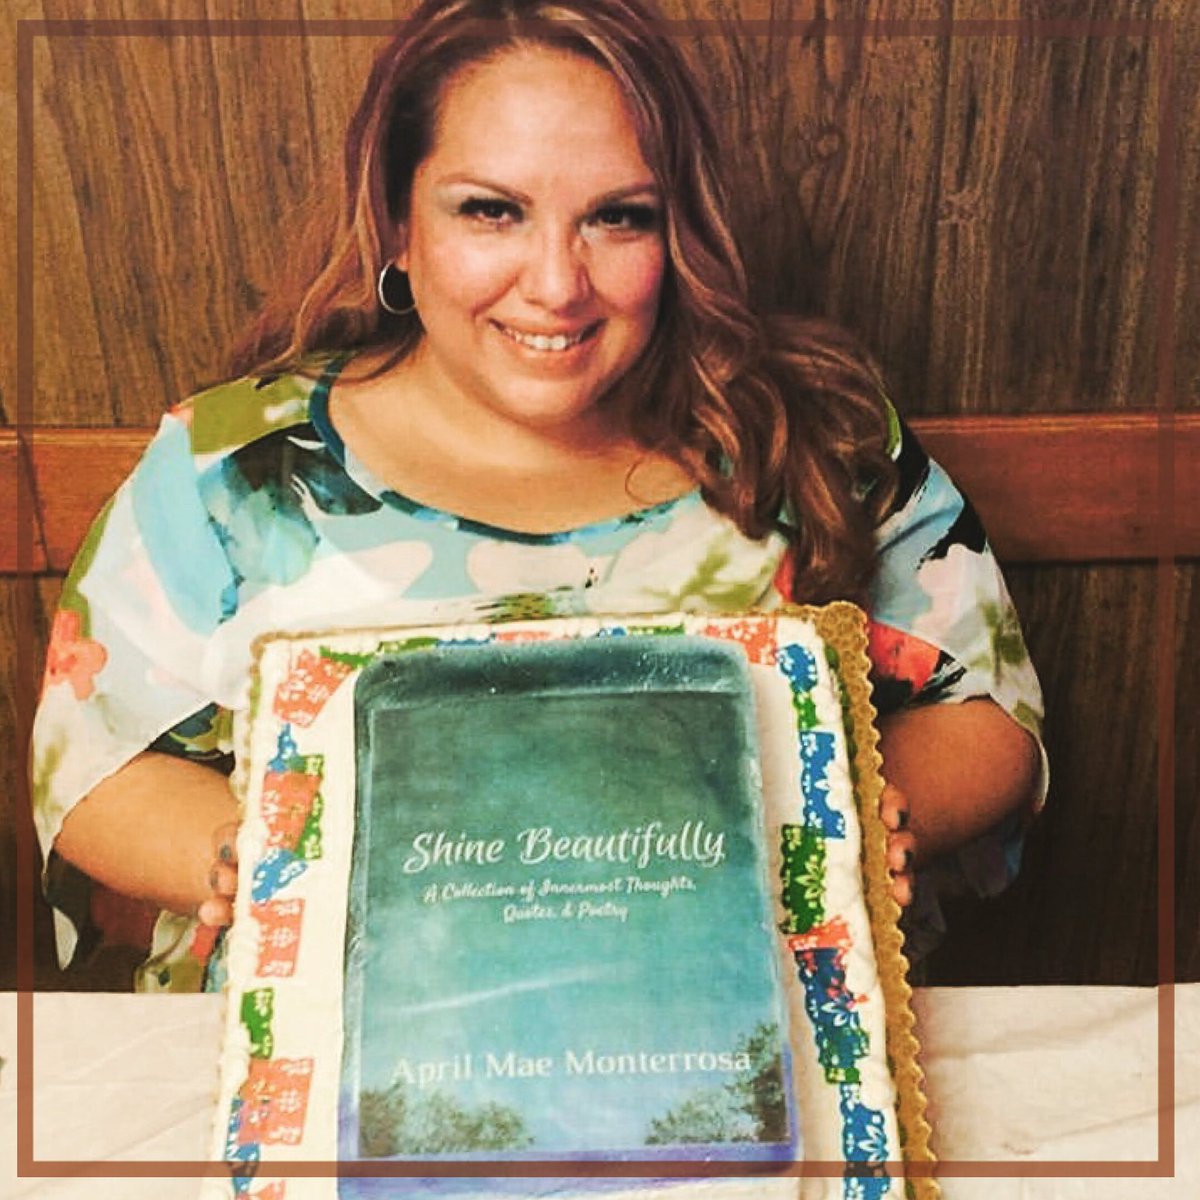 Thank You April Mae Monterrosa & family for choosing Don Pedro to celebrate your new book 📚 ‘Shine Beautifully’!! ALL THE BEST!! @aprilmonterrosa #book #writer #shinebeautifully #shinebeautiful #books #newbook #texasauthors #texaswriters #latinaauthors #theammcollection